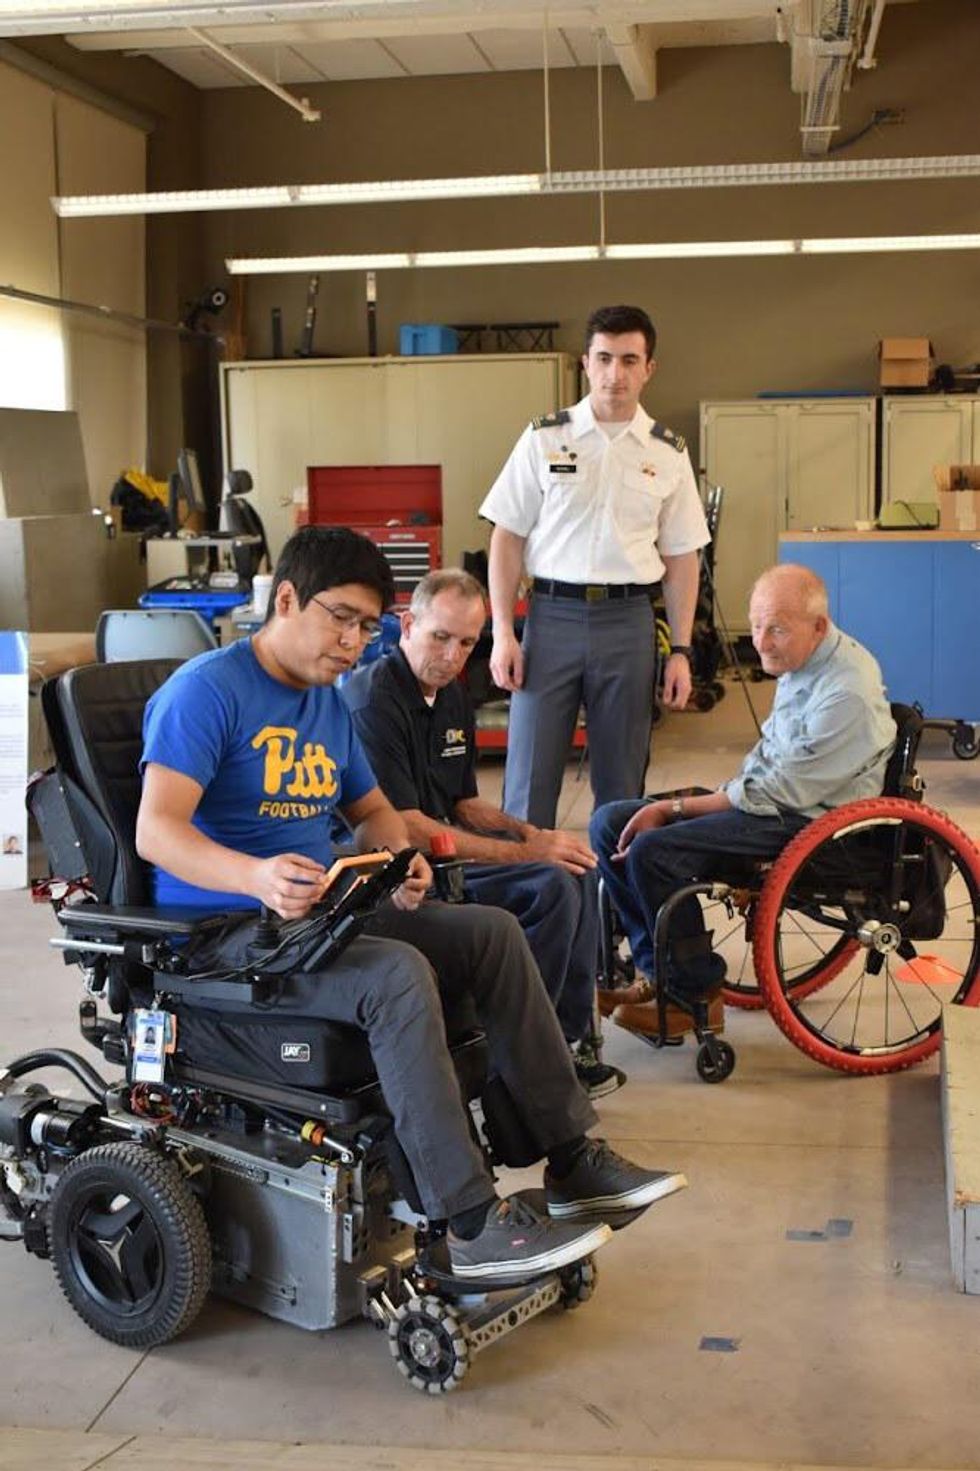 3 people sitting in a wheelchair and 1 man standing